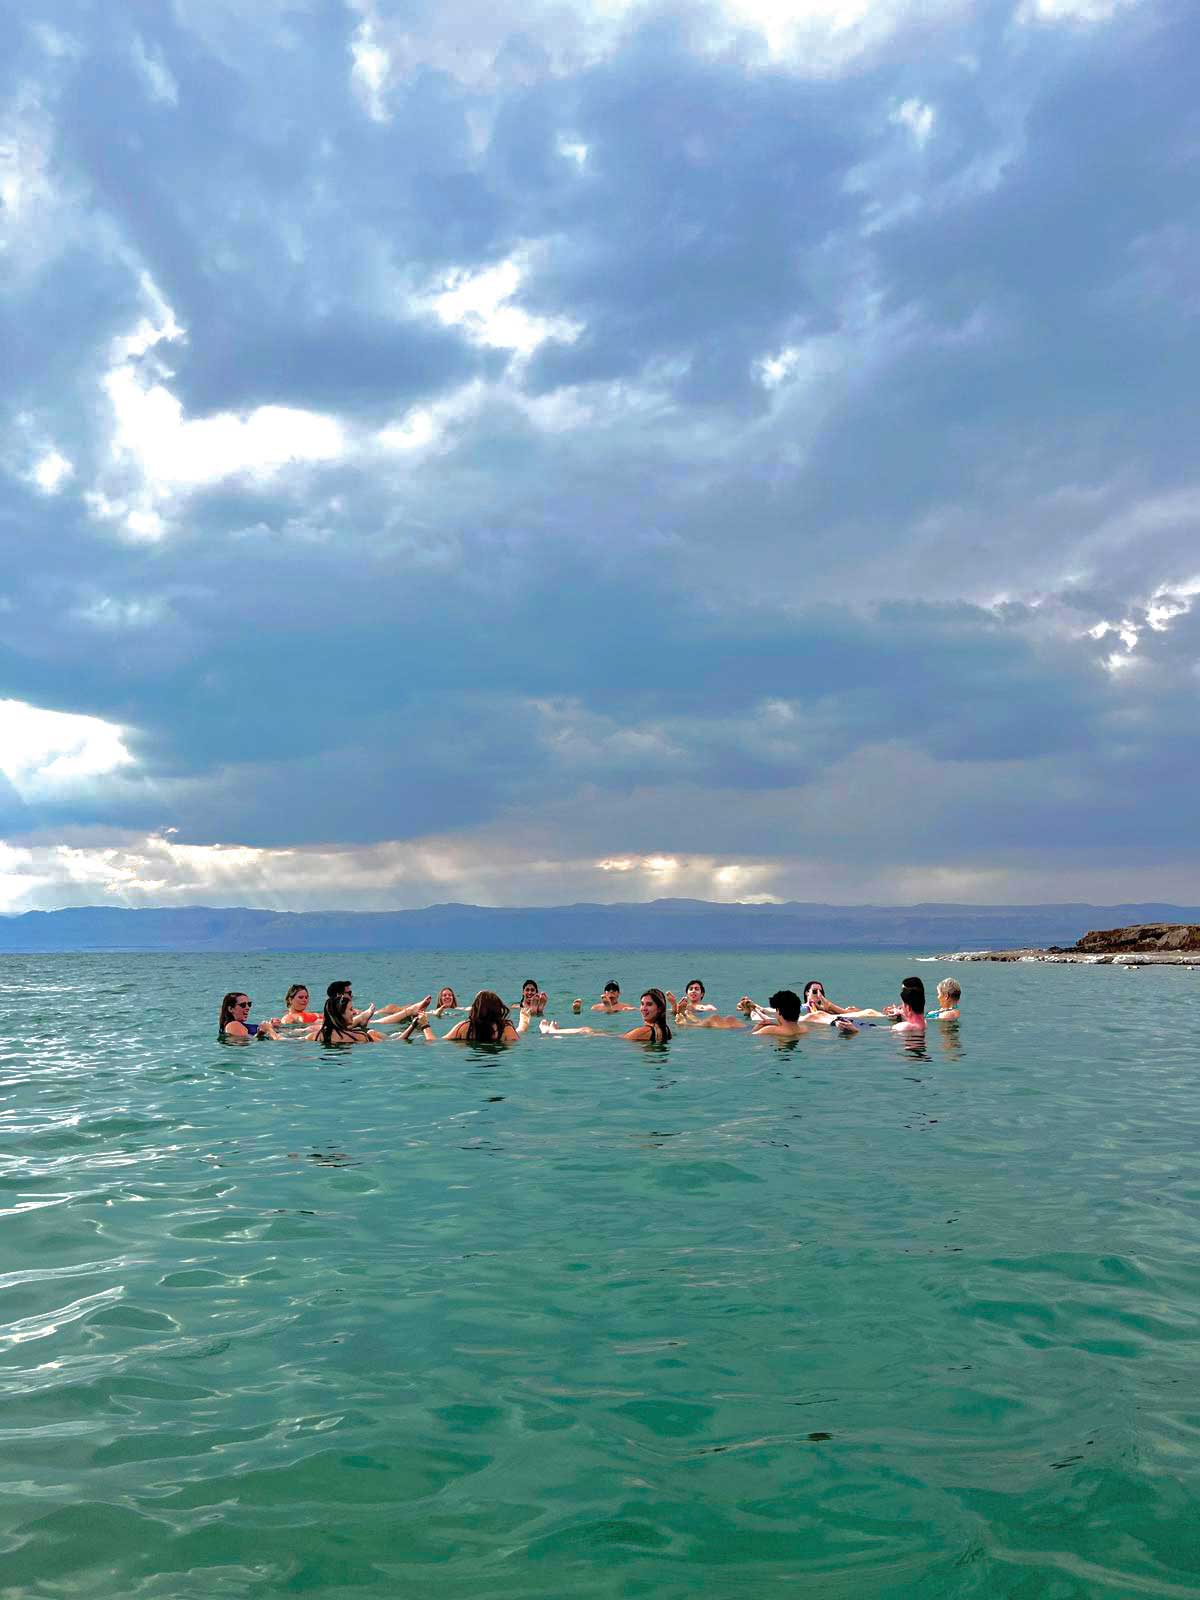 Study Abroad Students in a group swimming in beautiful blue water